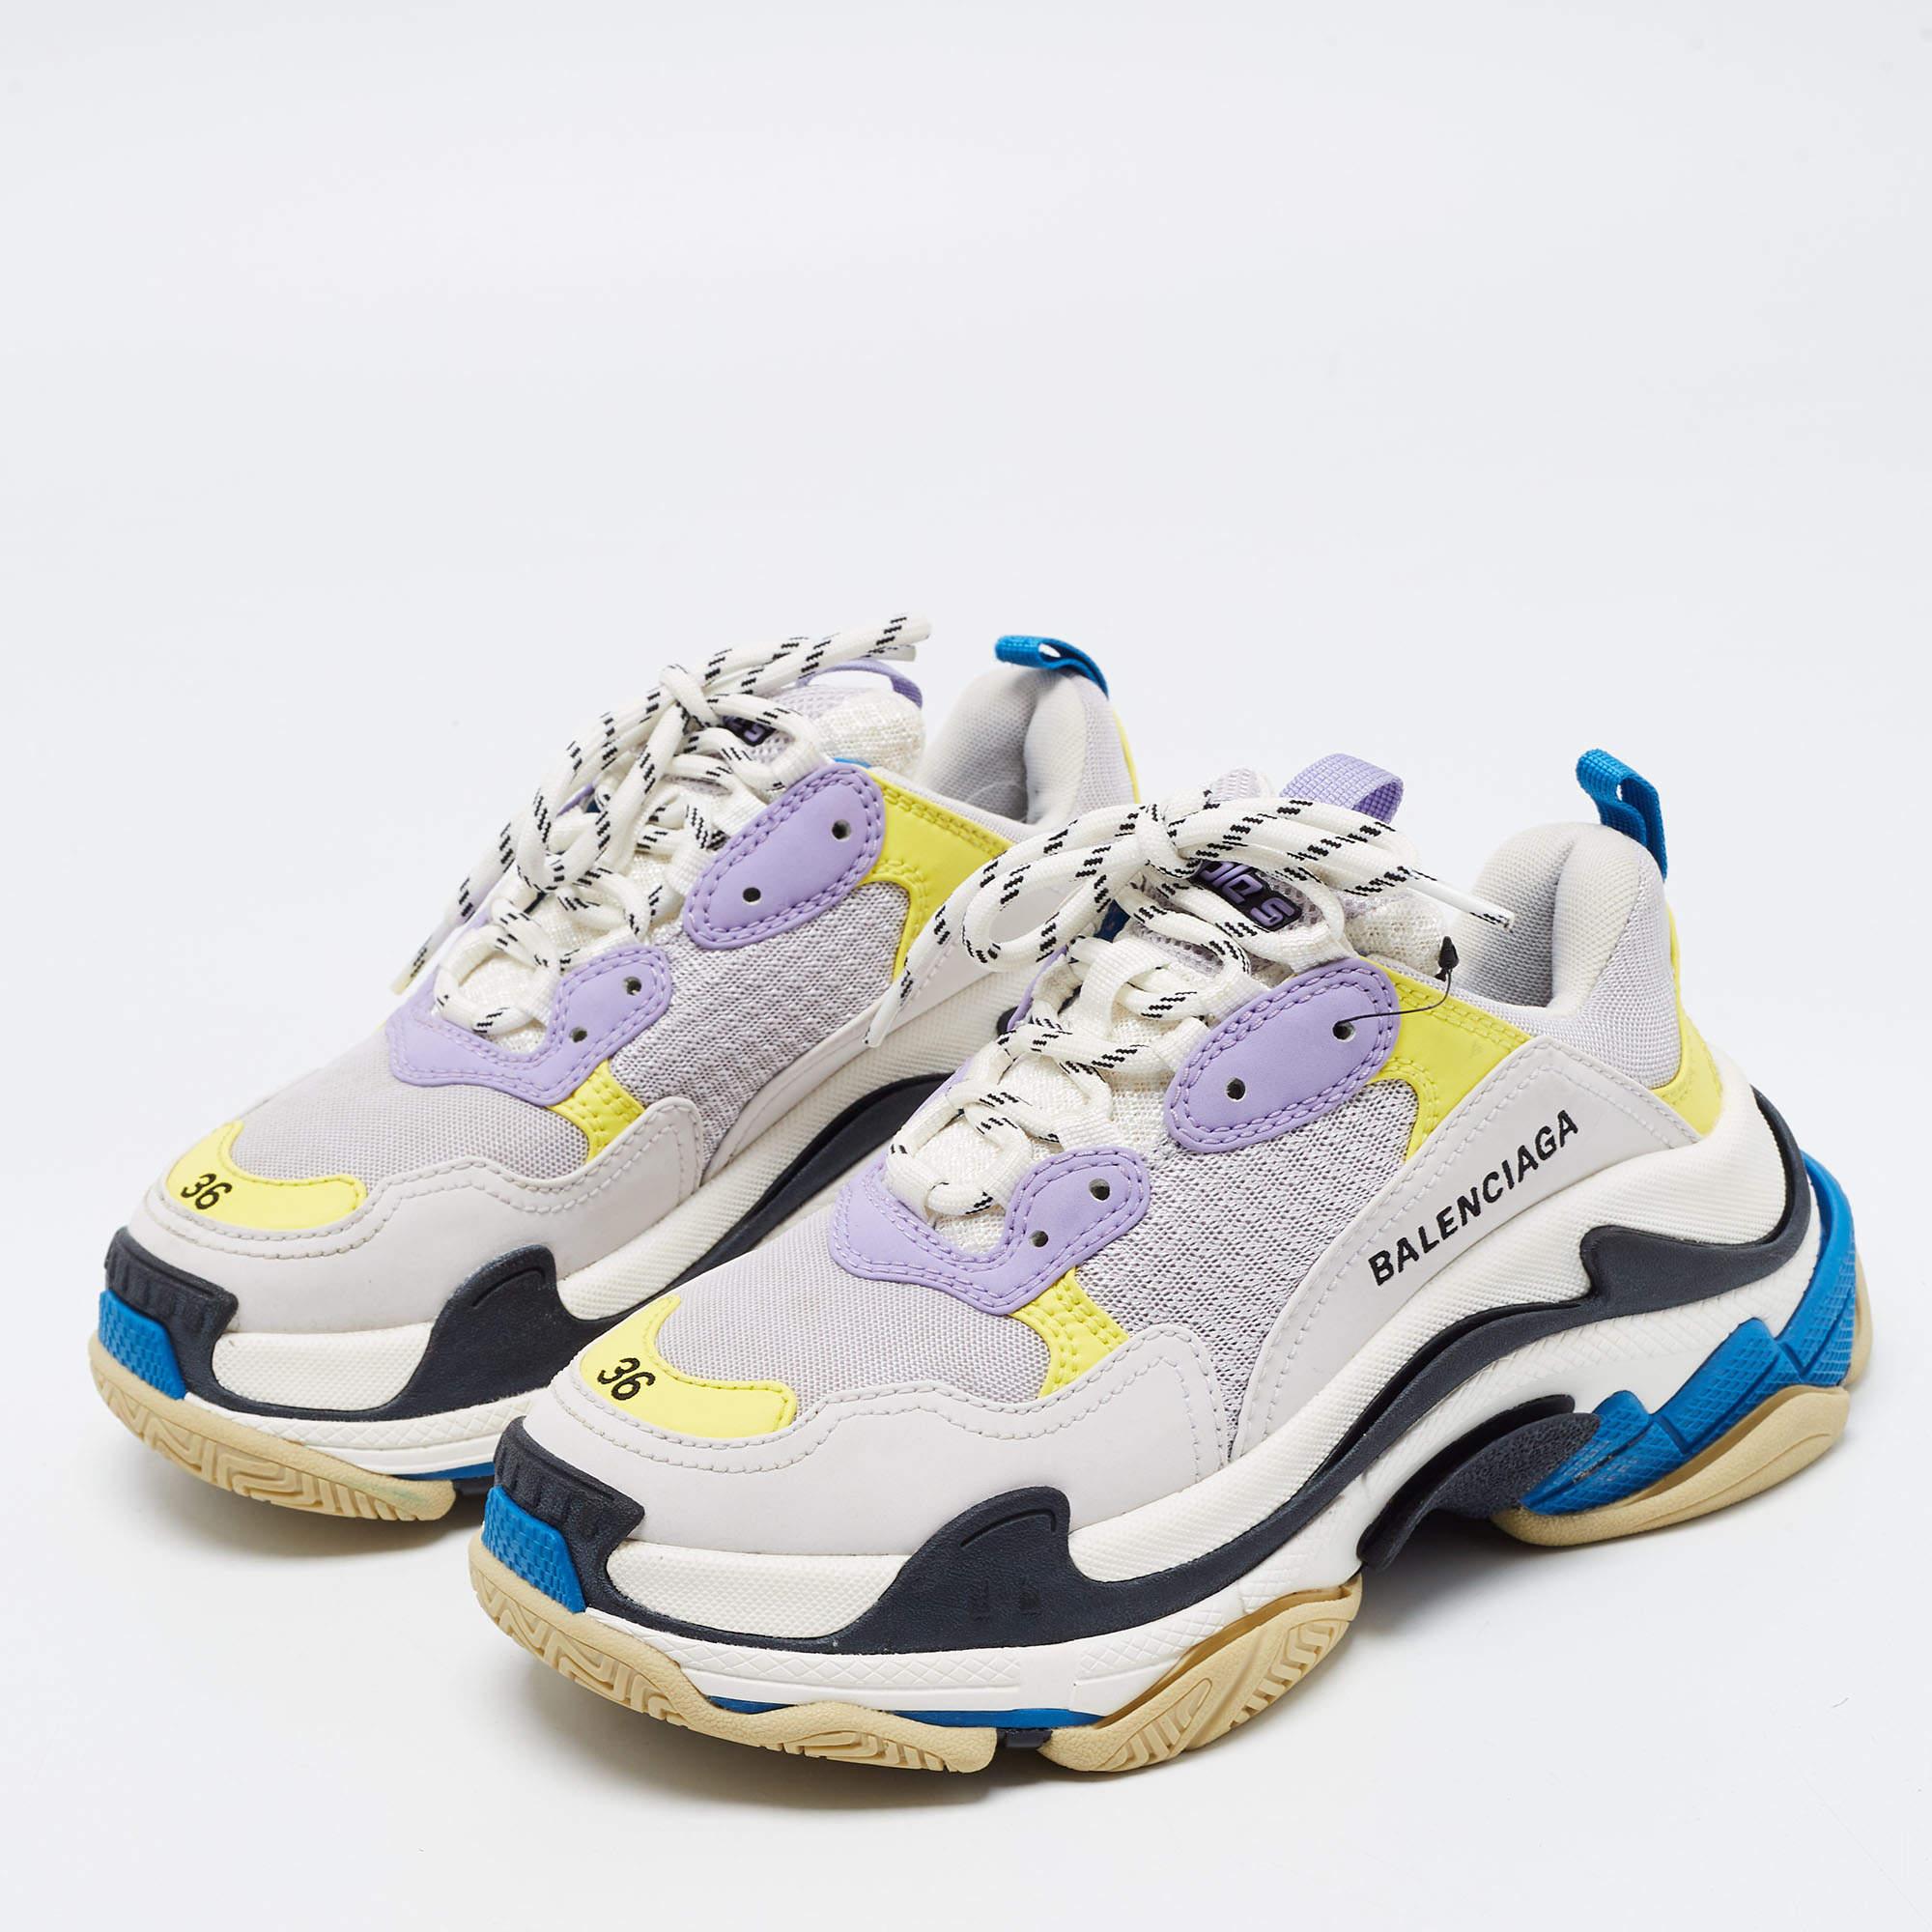 With durable construction, these Balenciaga sneakers will lend you a stylish modern look. The rubber soles of this pair will provide you with optimum grip while walking. Made from leather and mesh, these shoes get a luxe update with a brand